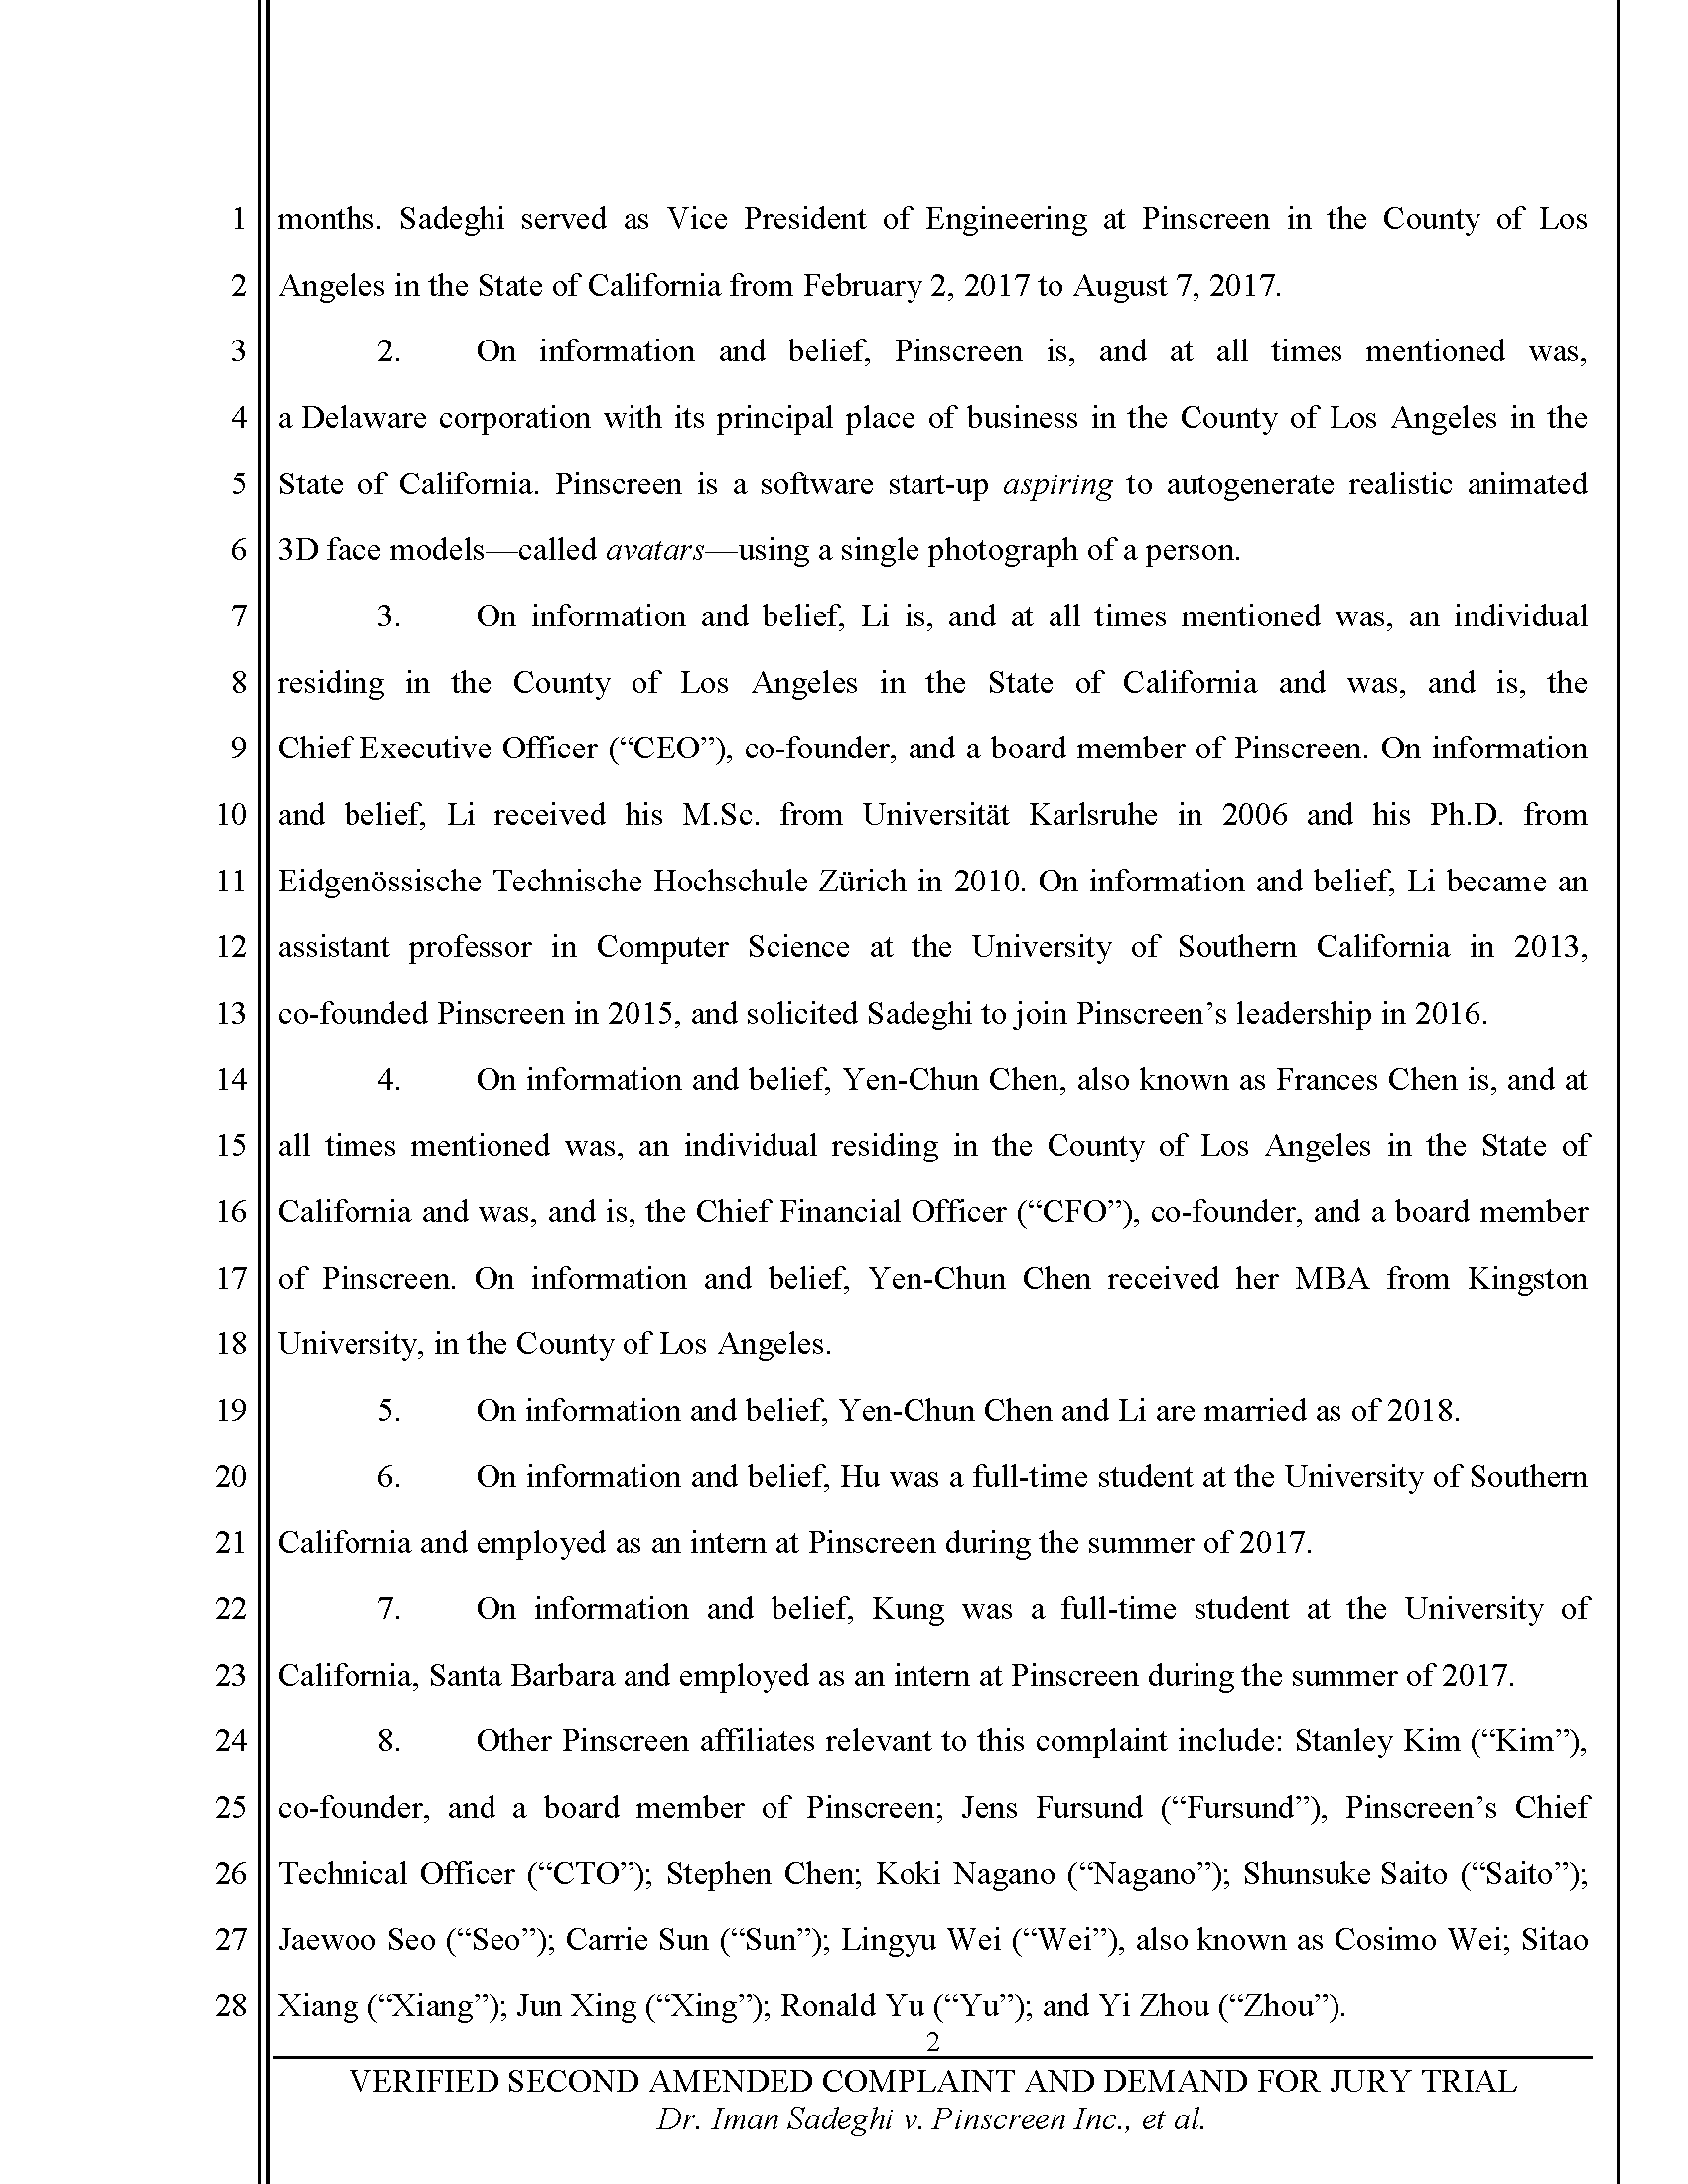 Second Amended Complaint (SAC) Page 3